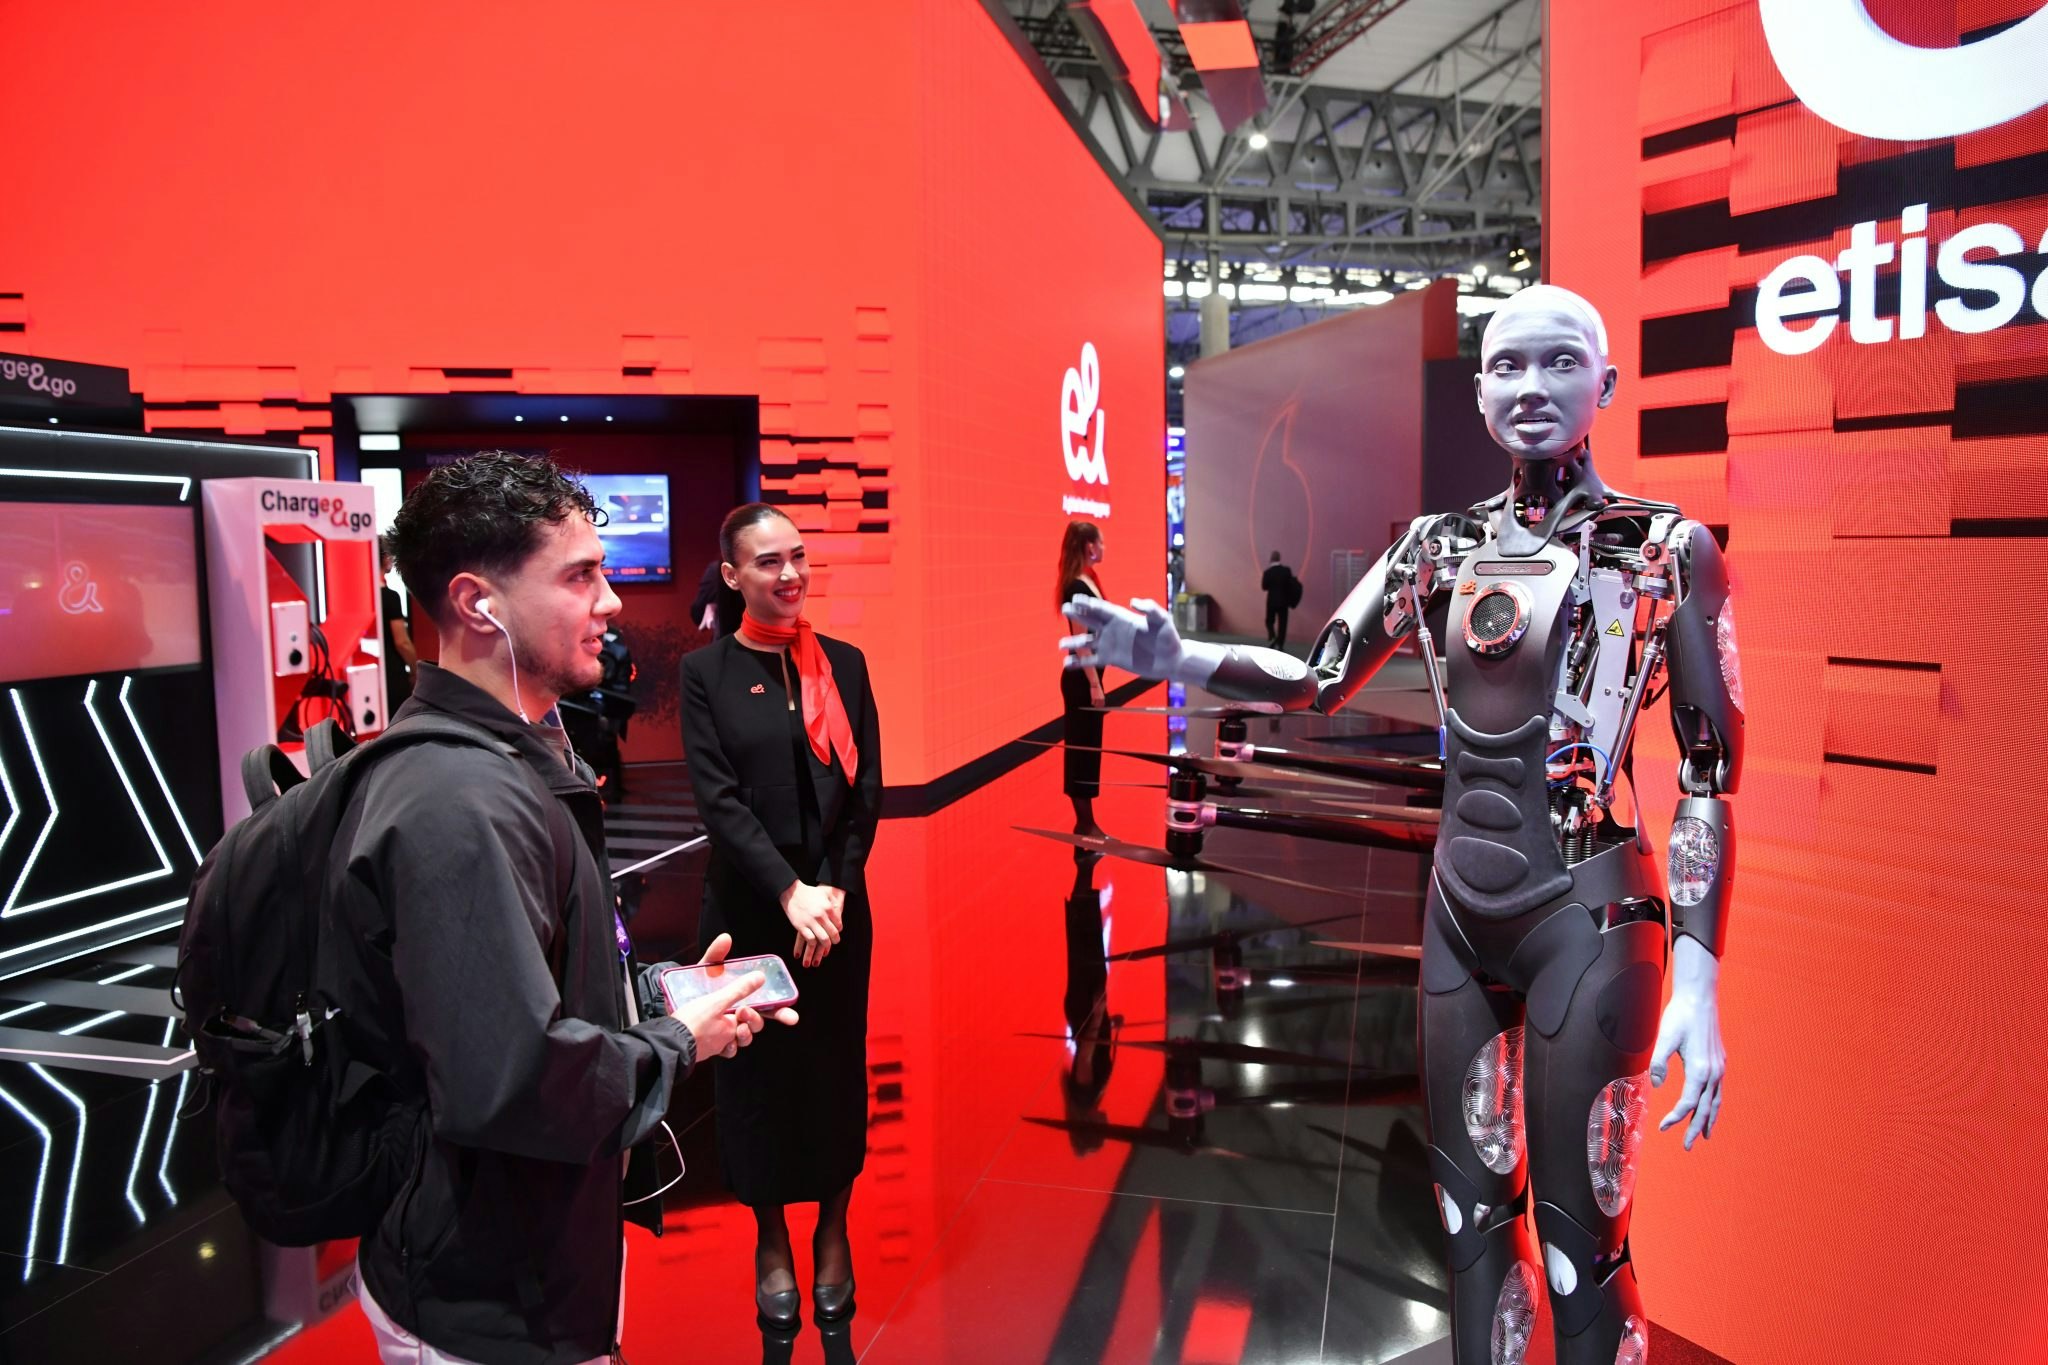 A robot greeting a human at the Mobile World Congress in Barcelona